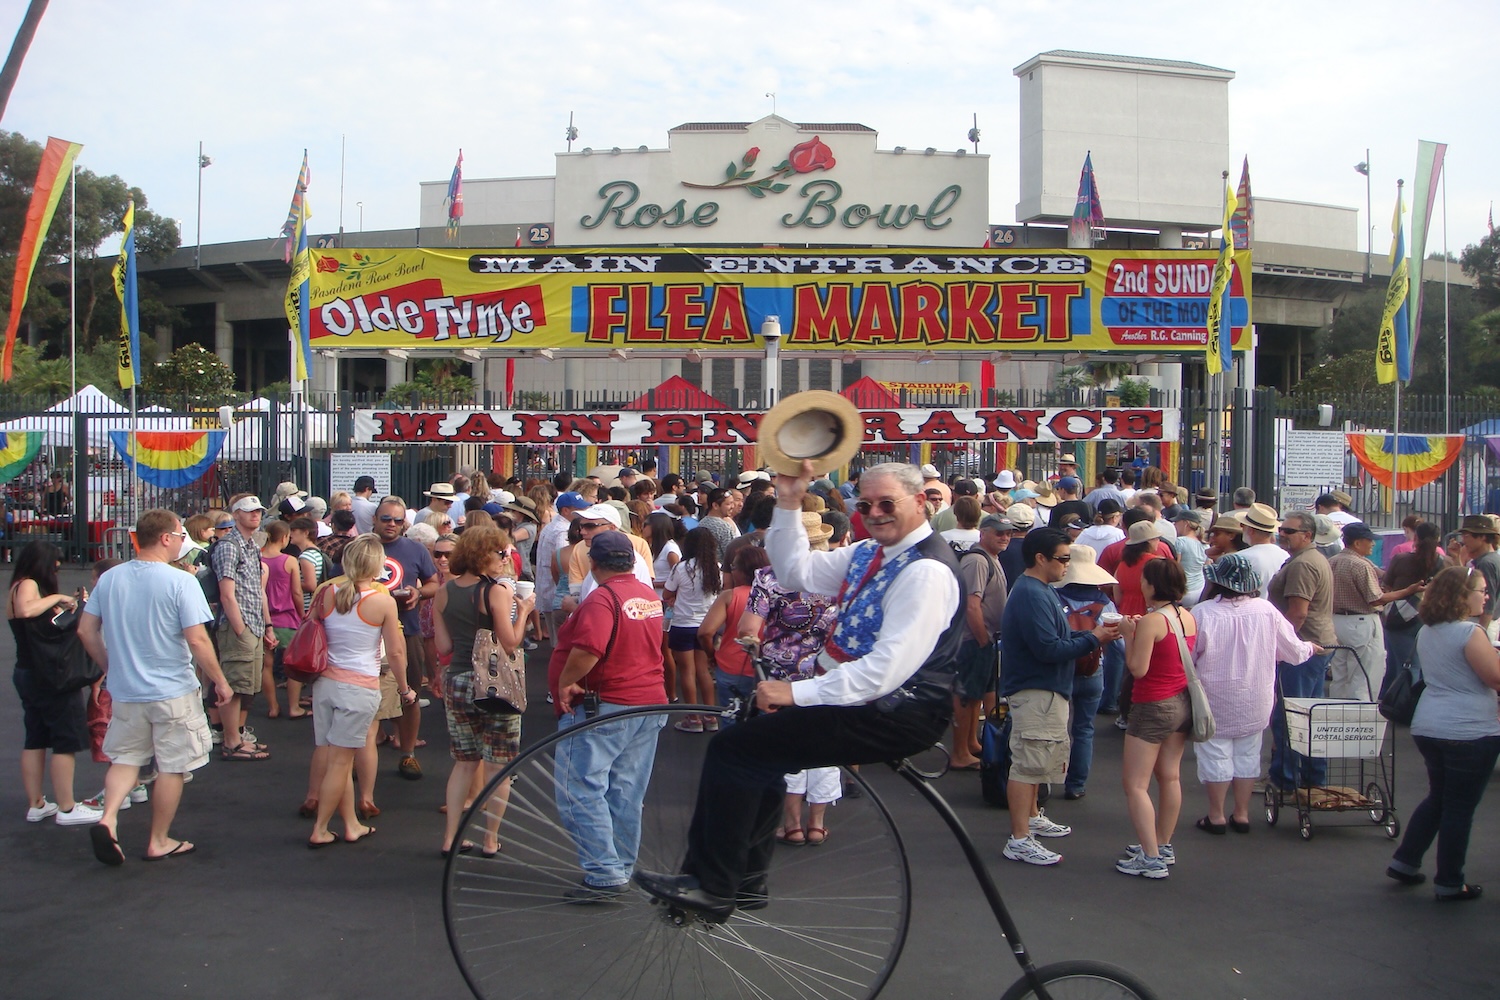 old man on a unicycle holding his hat in front of crowd and sign